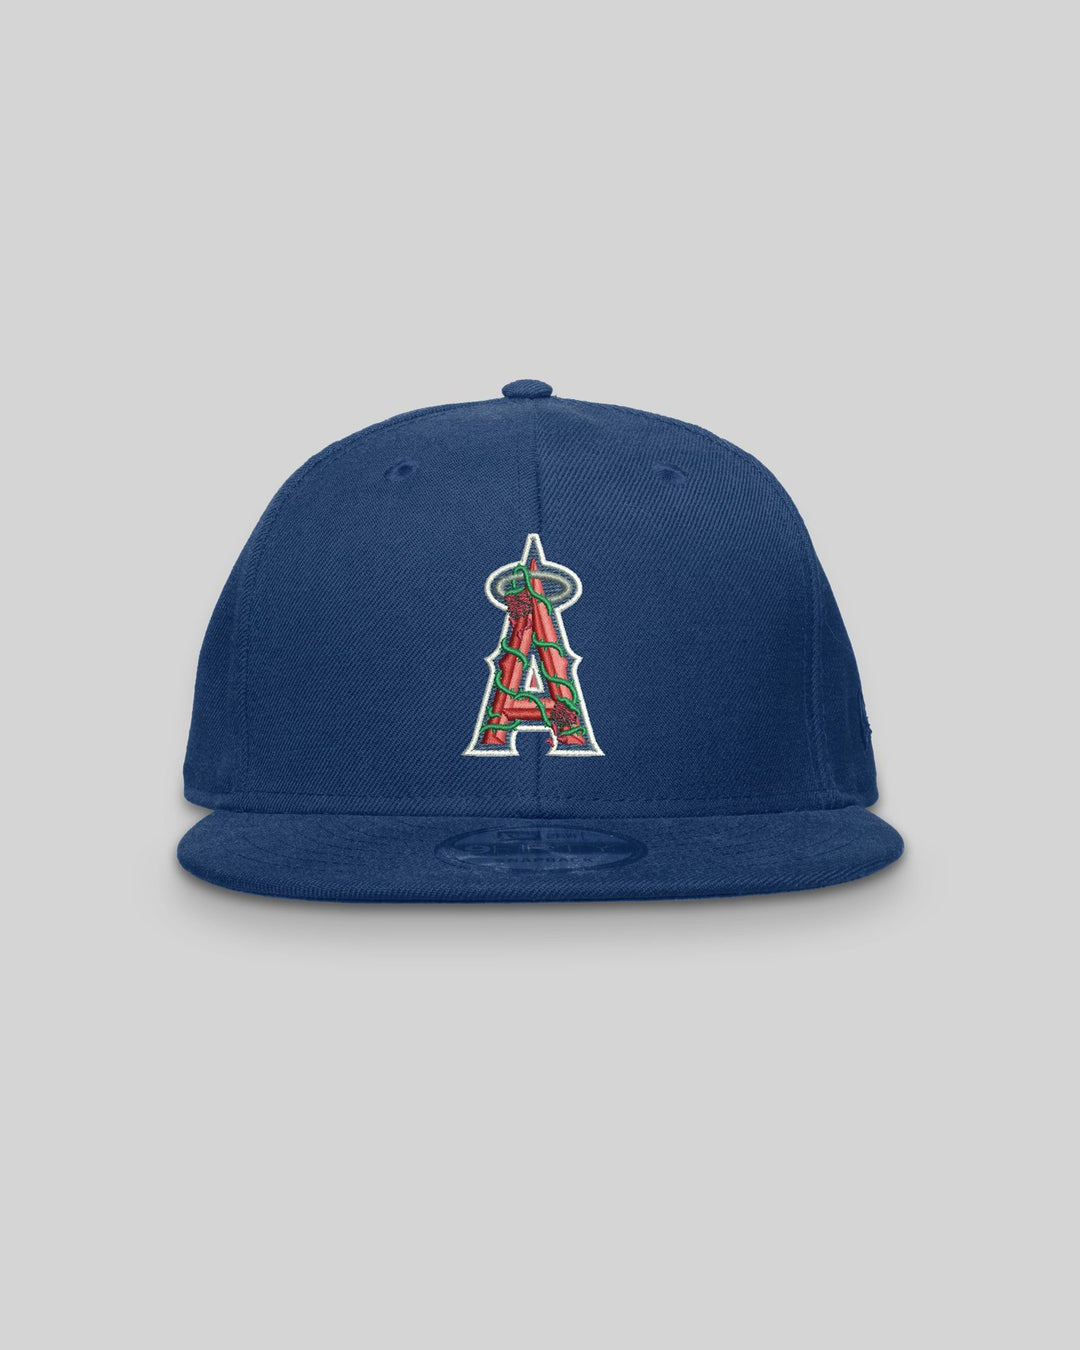 Angels City Rose New Era Navy Blue Snapback - trainofthoughtcollective